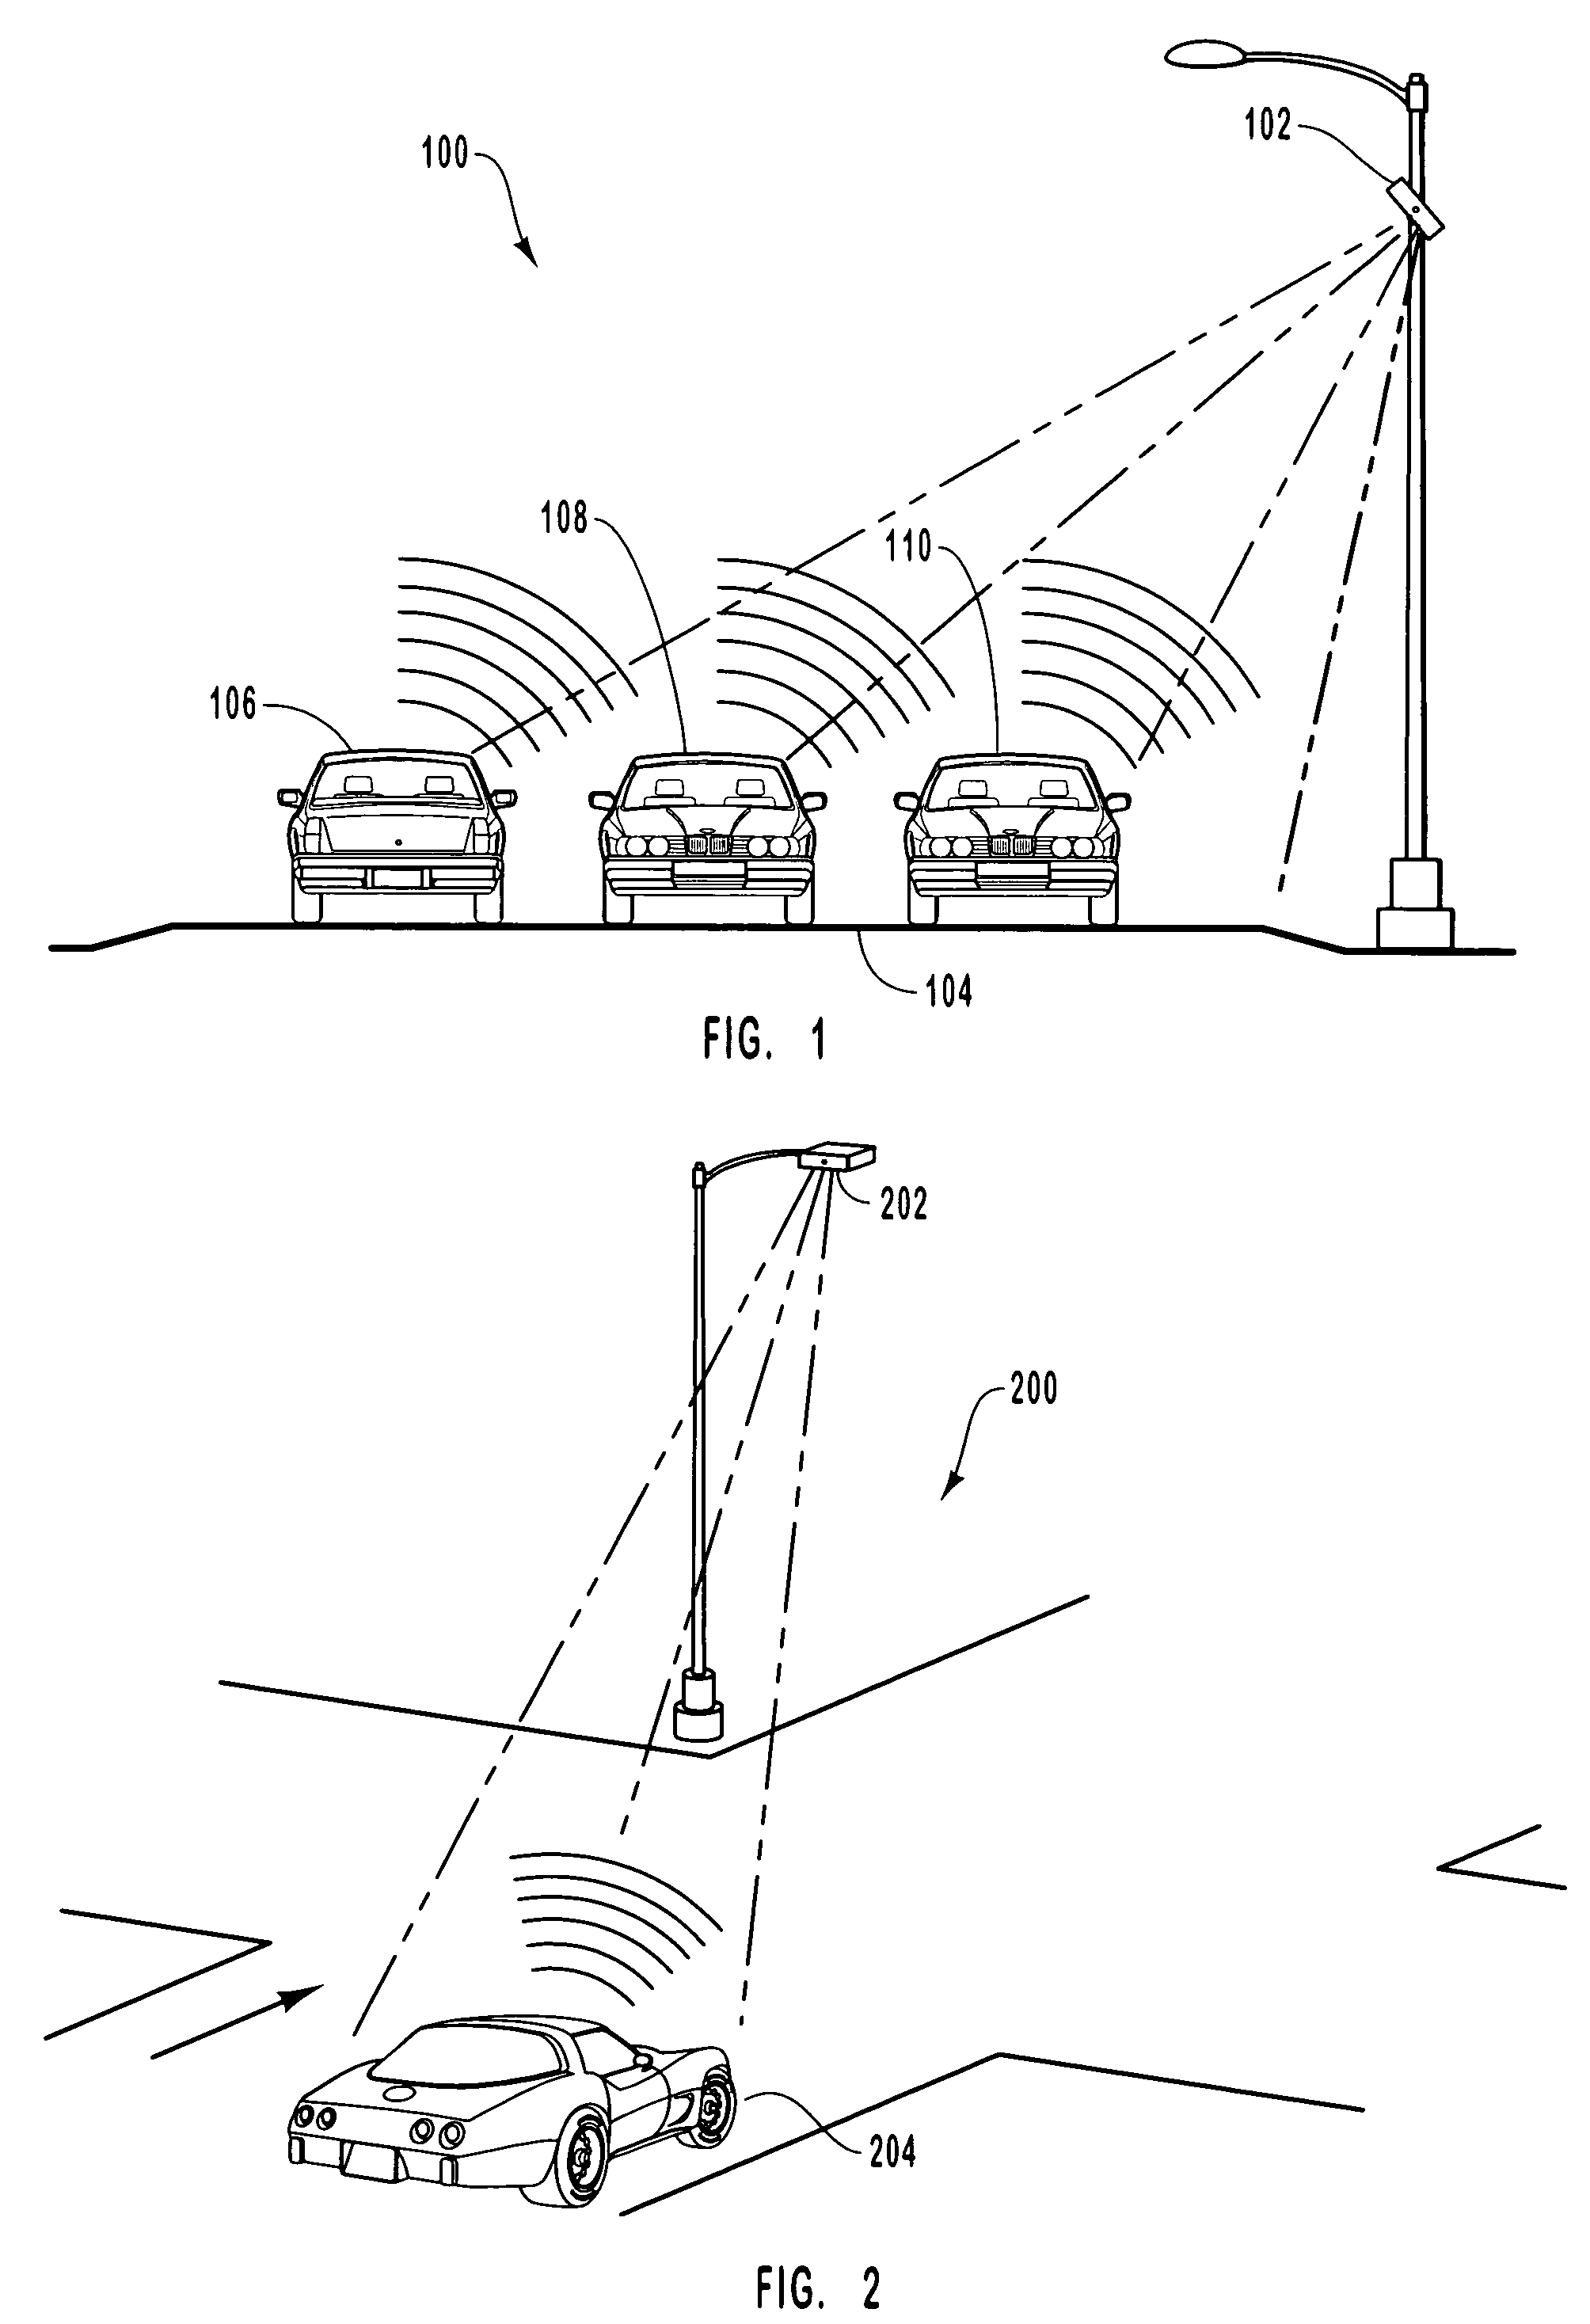 Systems and methods for monitoring speed